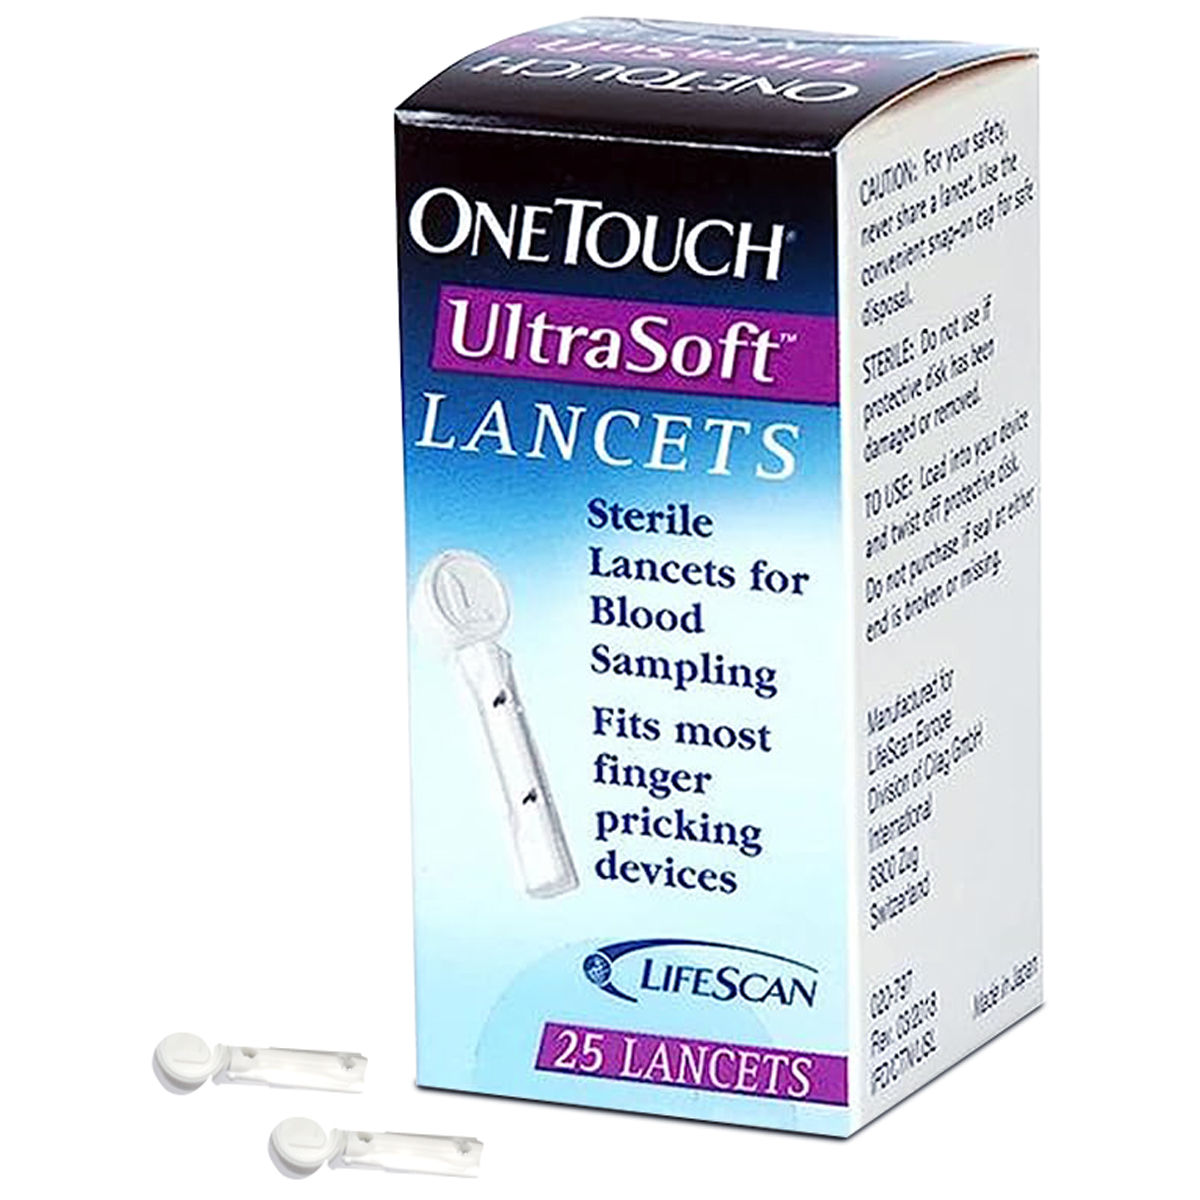 Buy OneTouch Ultra Soft Lancets, 25 Count Online